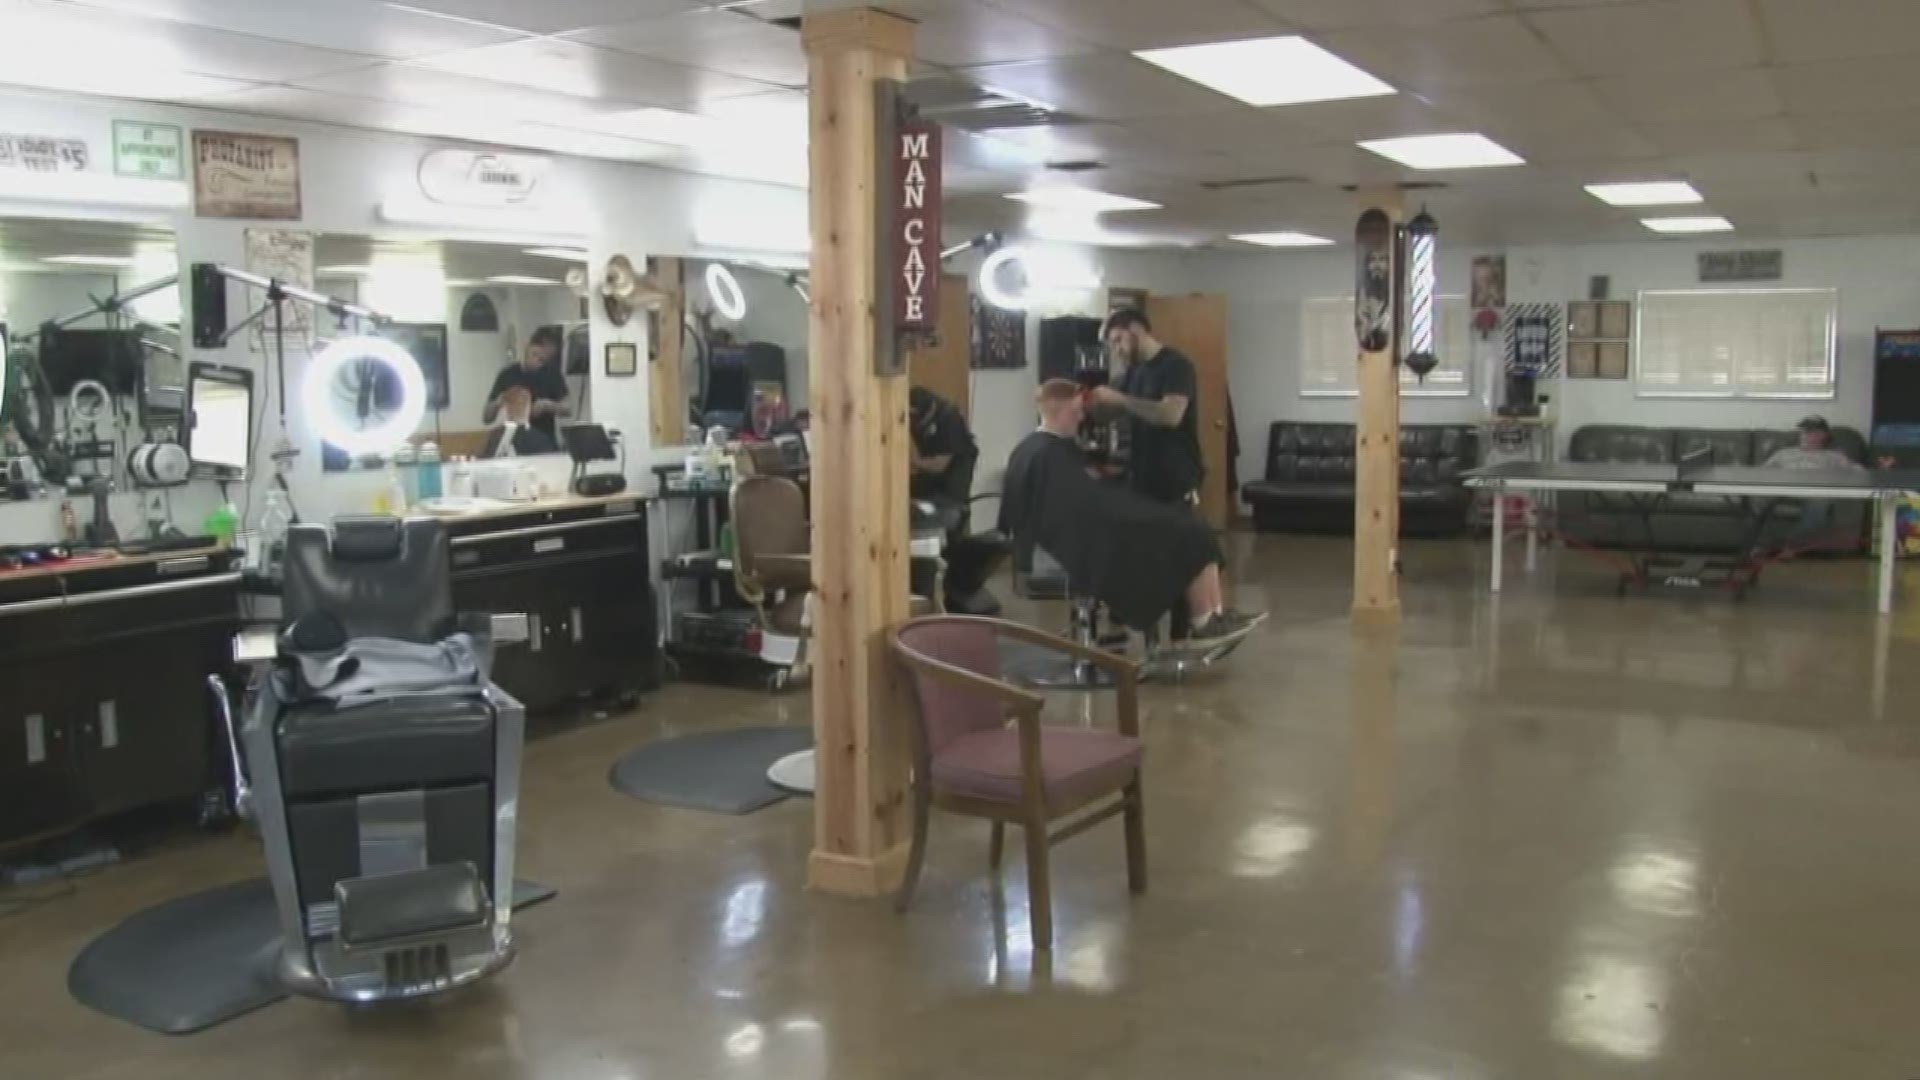 The event will bring thousands of barbers to Knoxville. The barber who organized it was a drug addict and convicted robber a decade ago. Through faith he is sober.